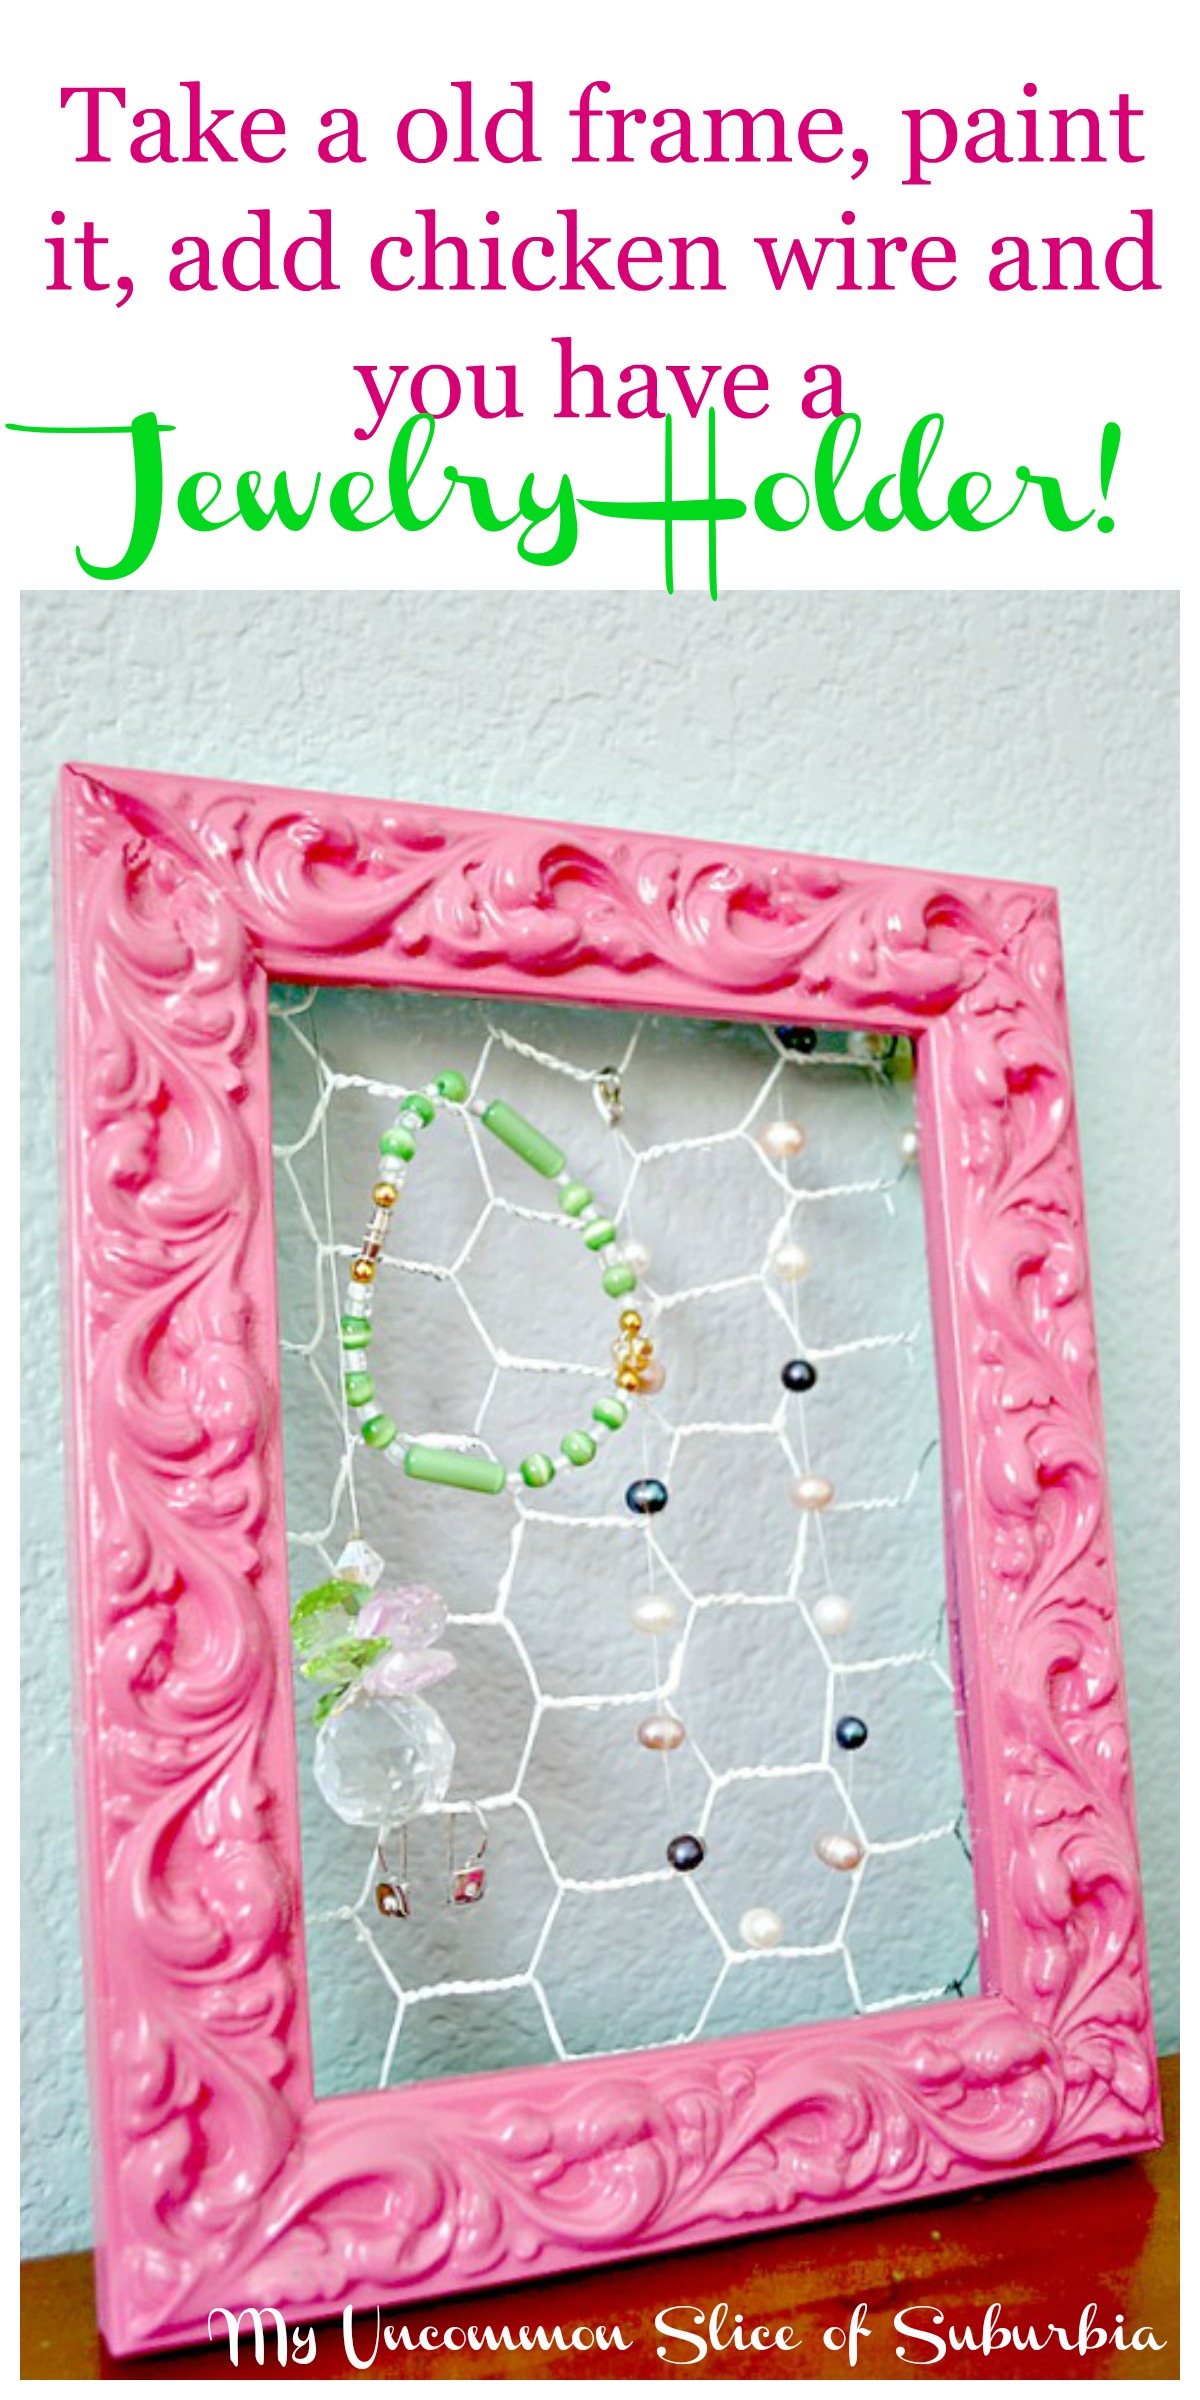 How to Make Chicken Wire Frames from Thrift Store Finds